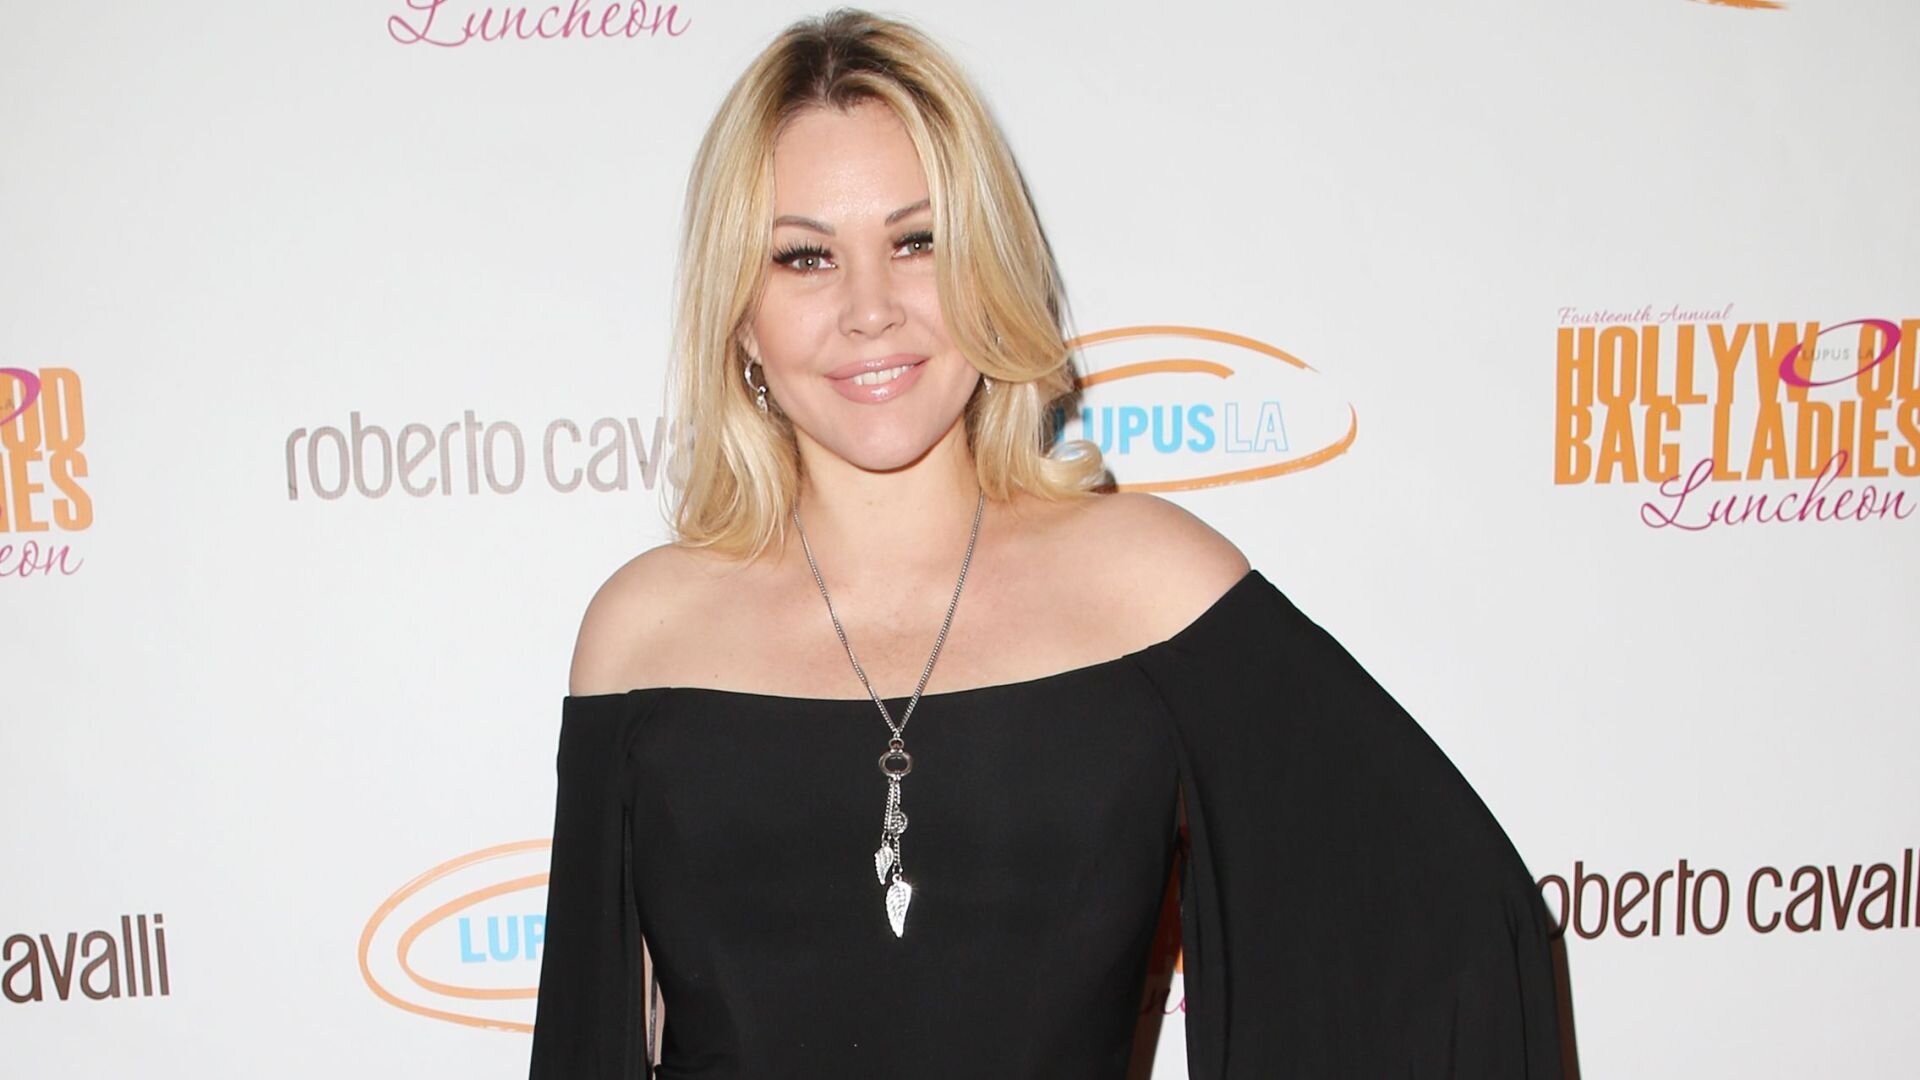 Travis Barker’s Ex Shanna Moakler Has an Impressive Net Worth Thanks to Modeling and Acting